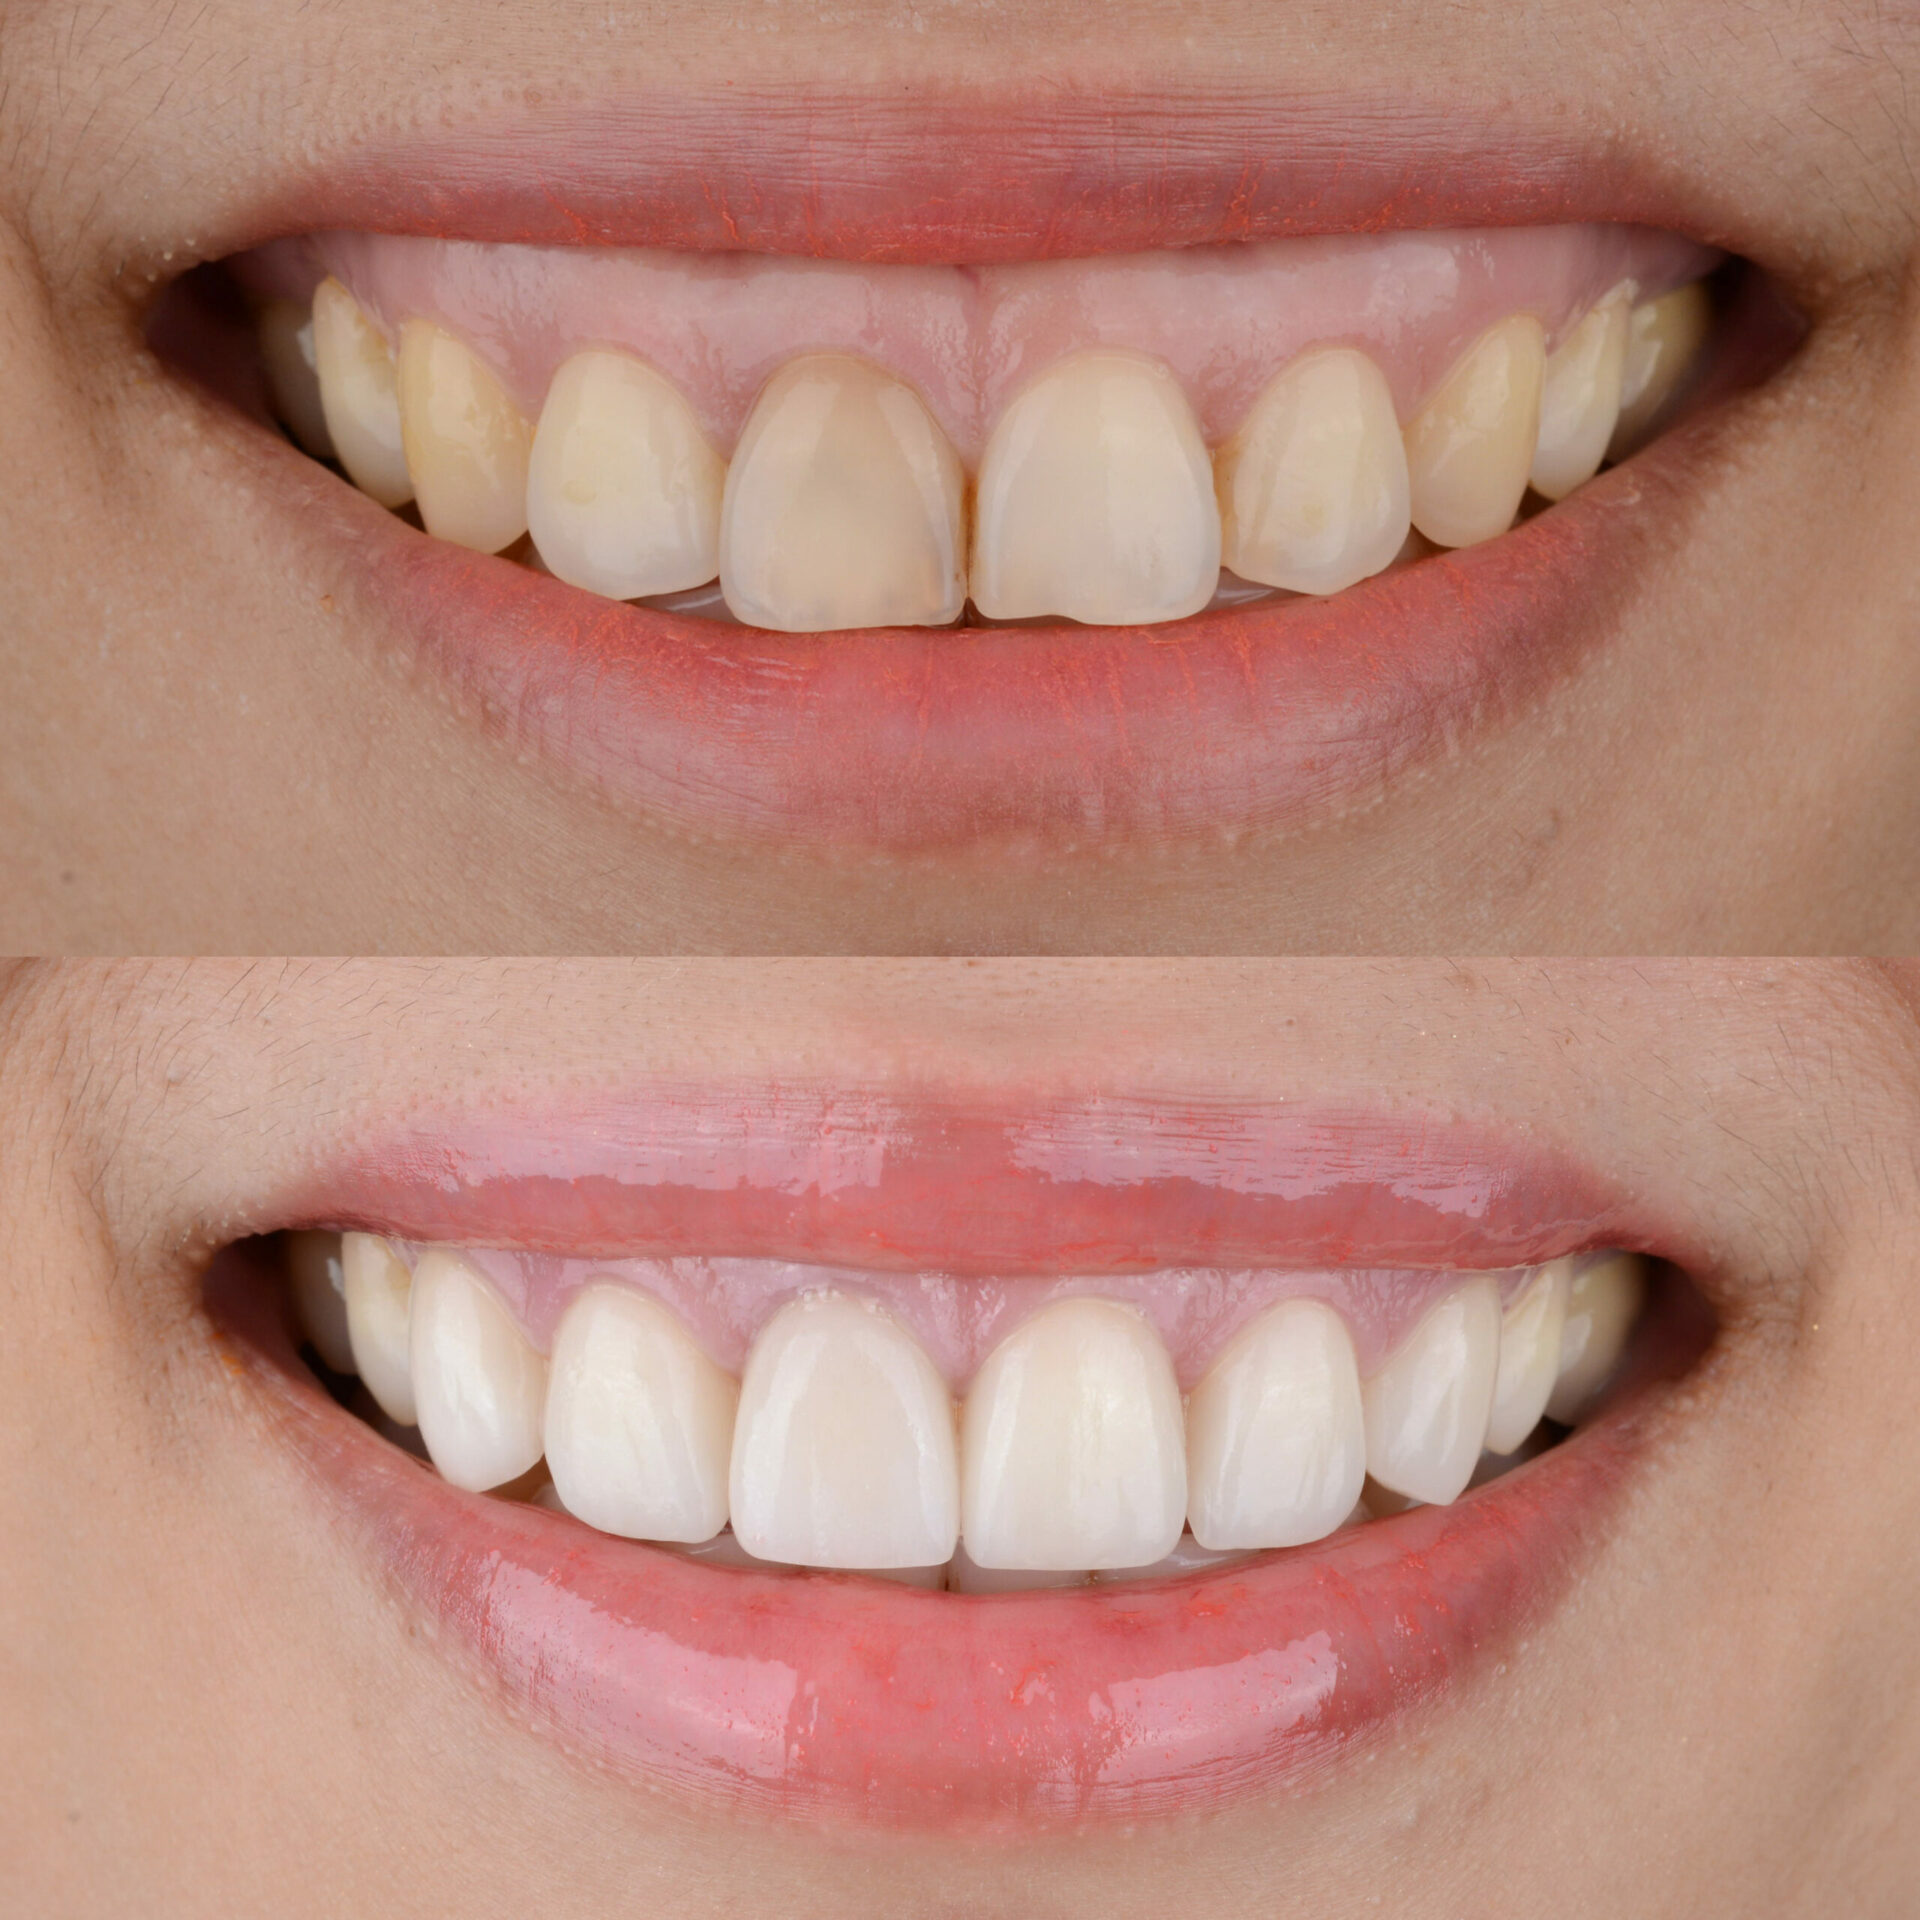 What Can Cause a Gummy Smile, and How Can It Be Changed?